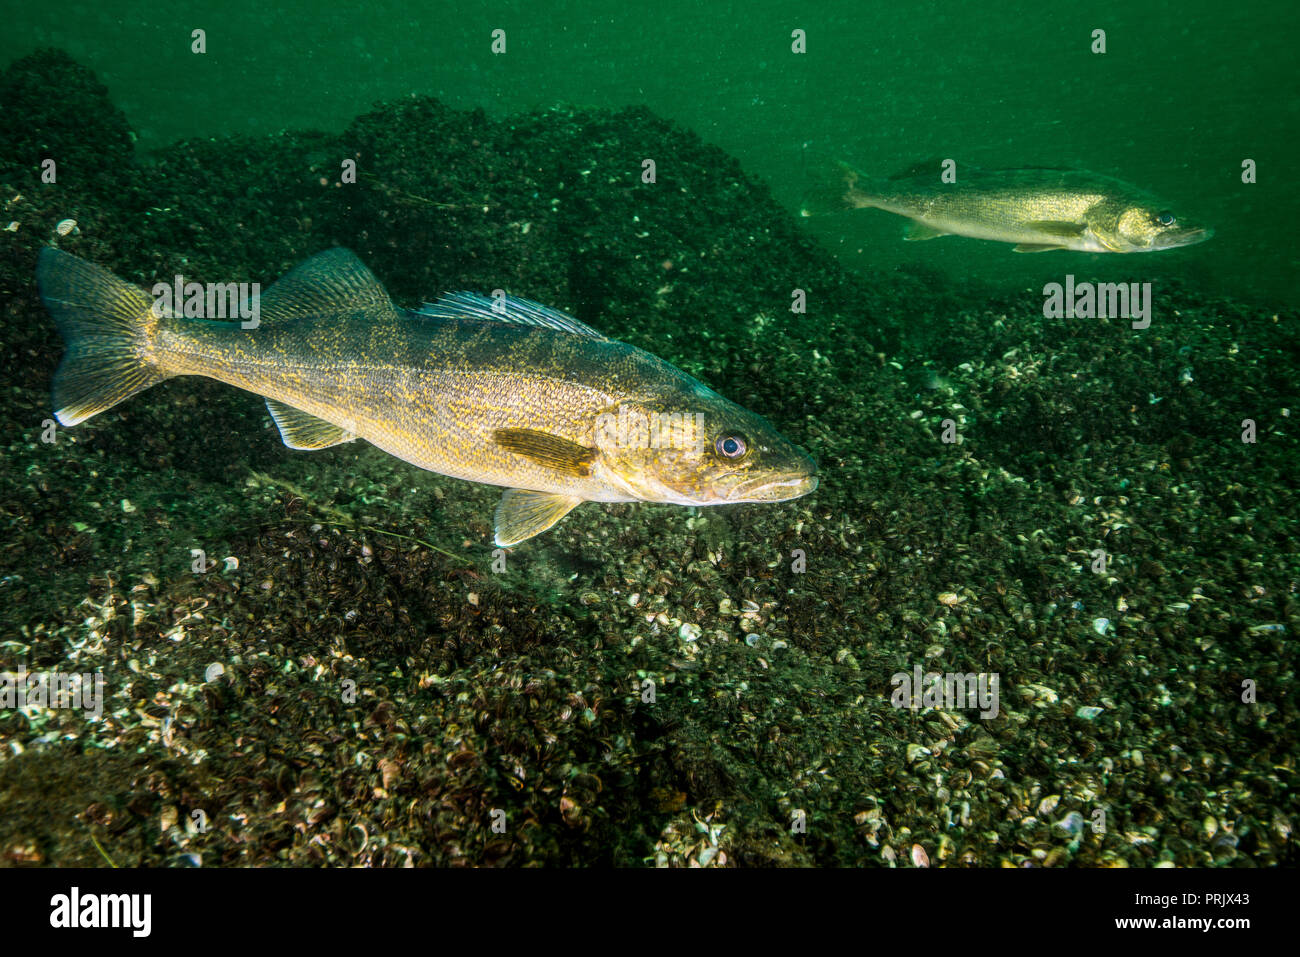 Walleye fish swimming in the St-Lawrence River Stock Photo